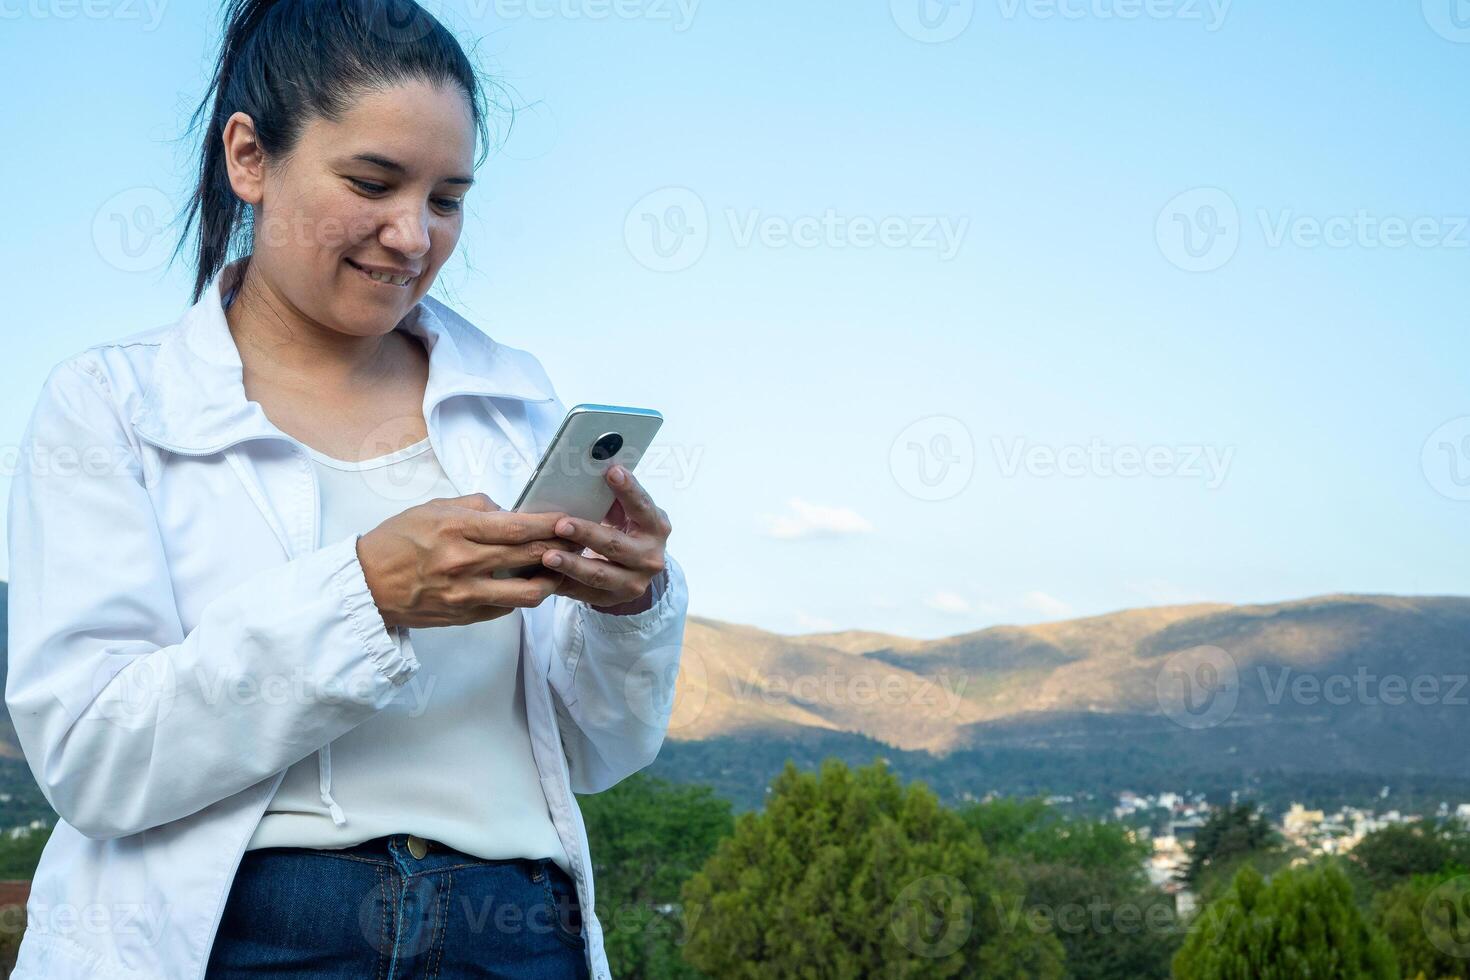 Latin woman using her cell phone in a park. photo